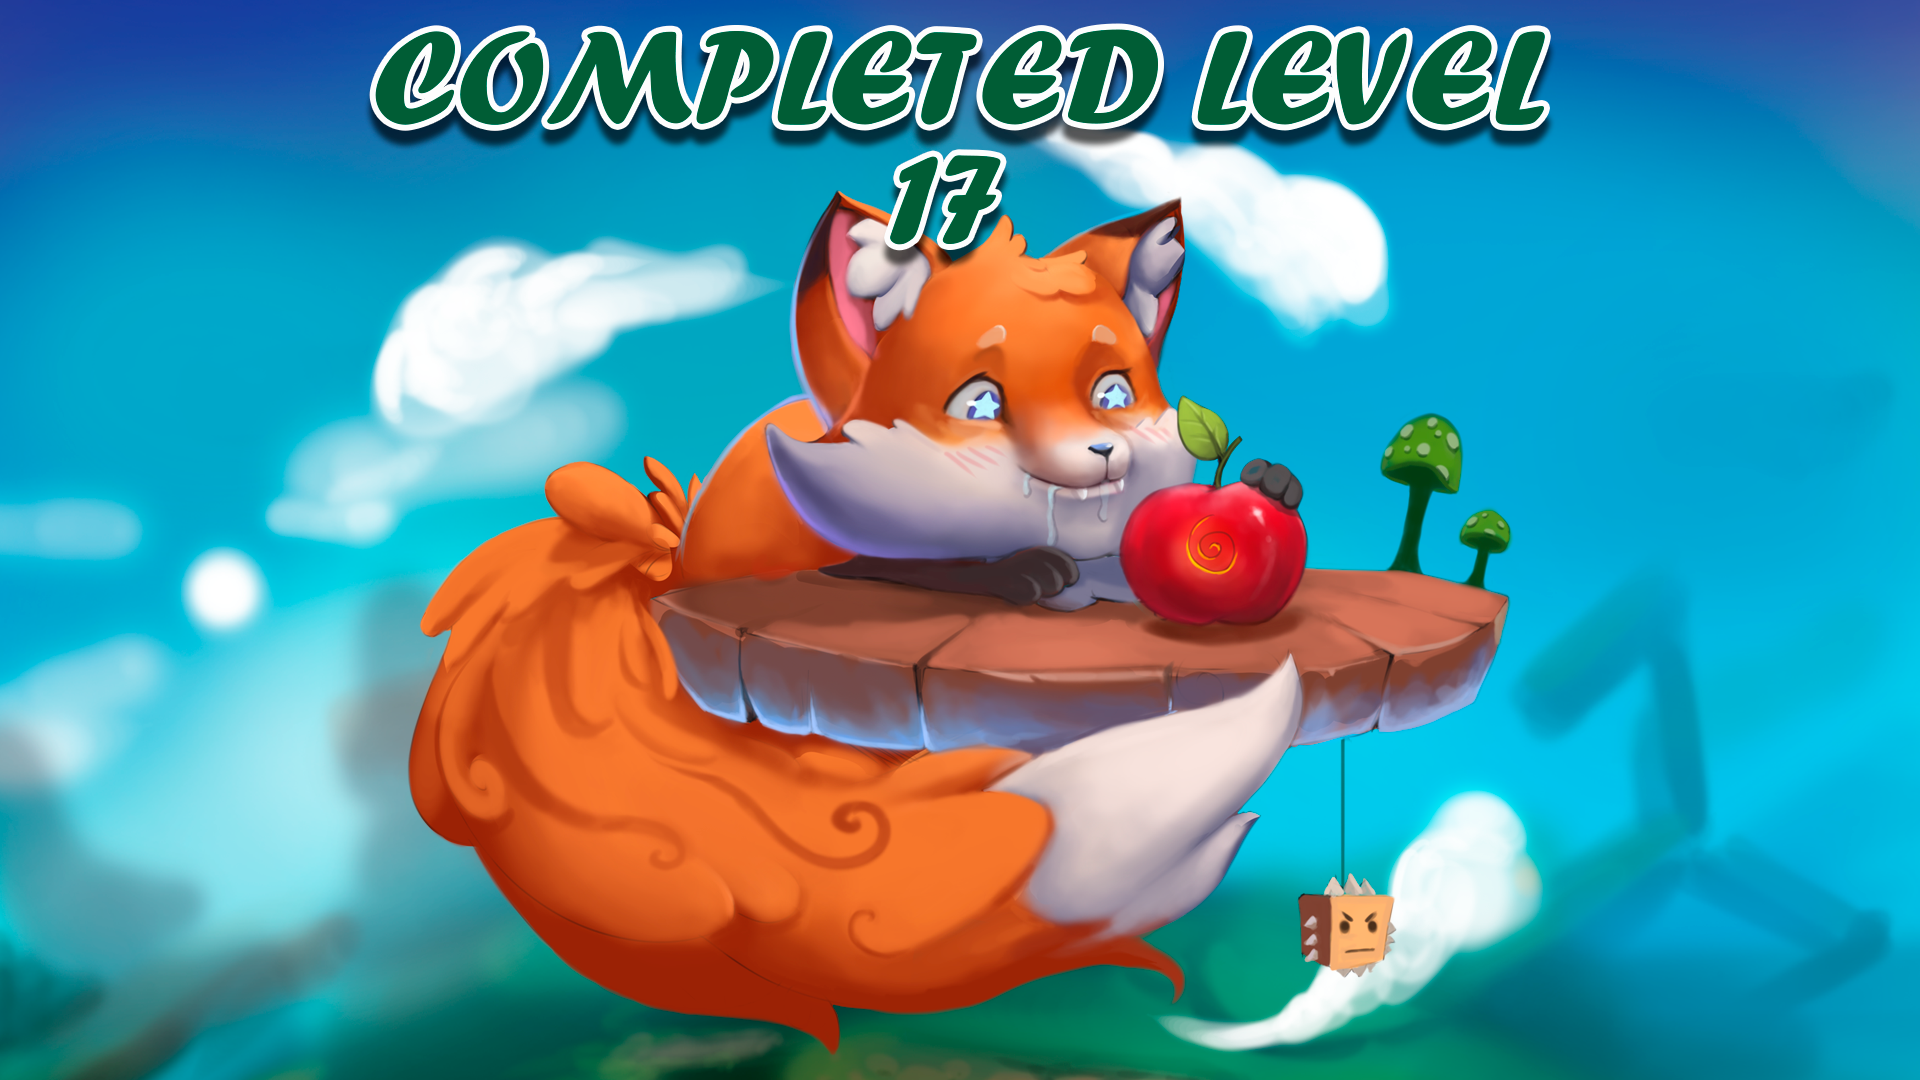 17 levels completed